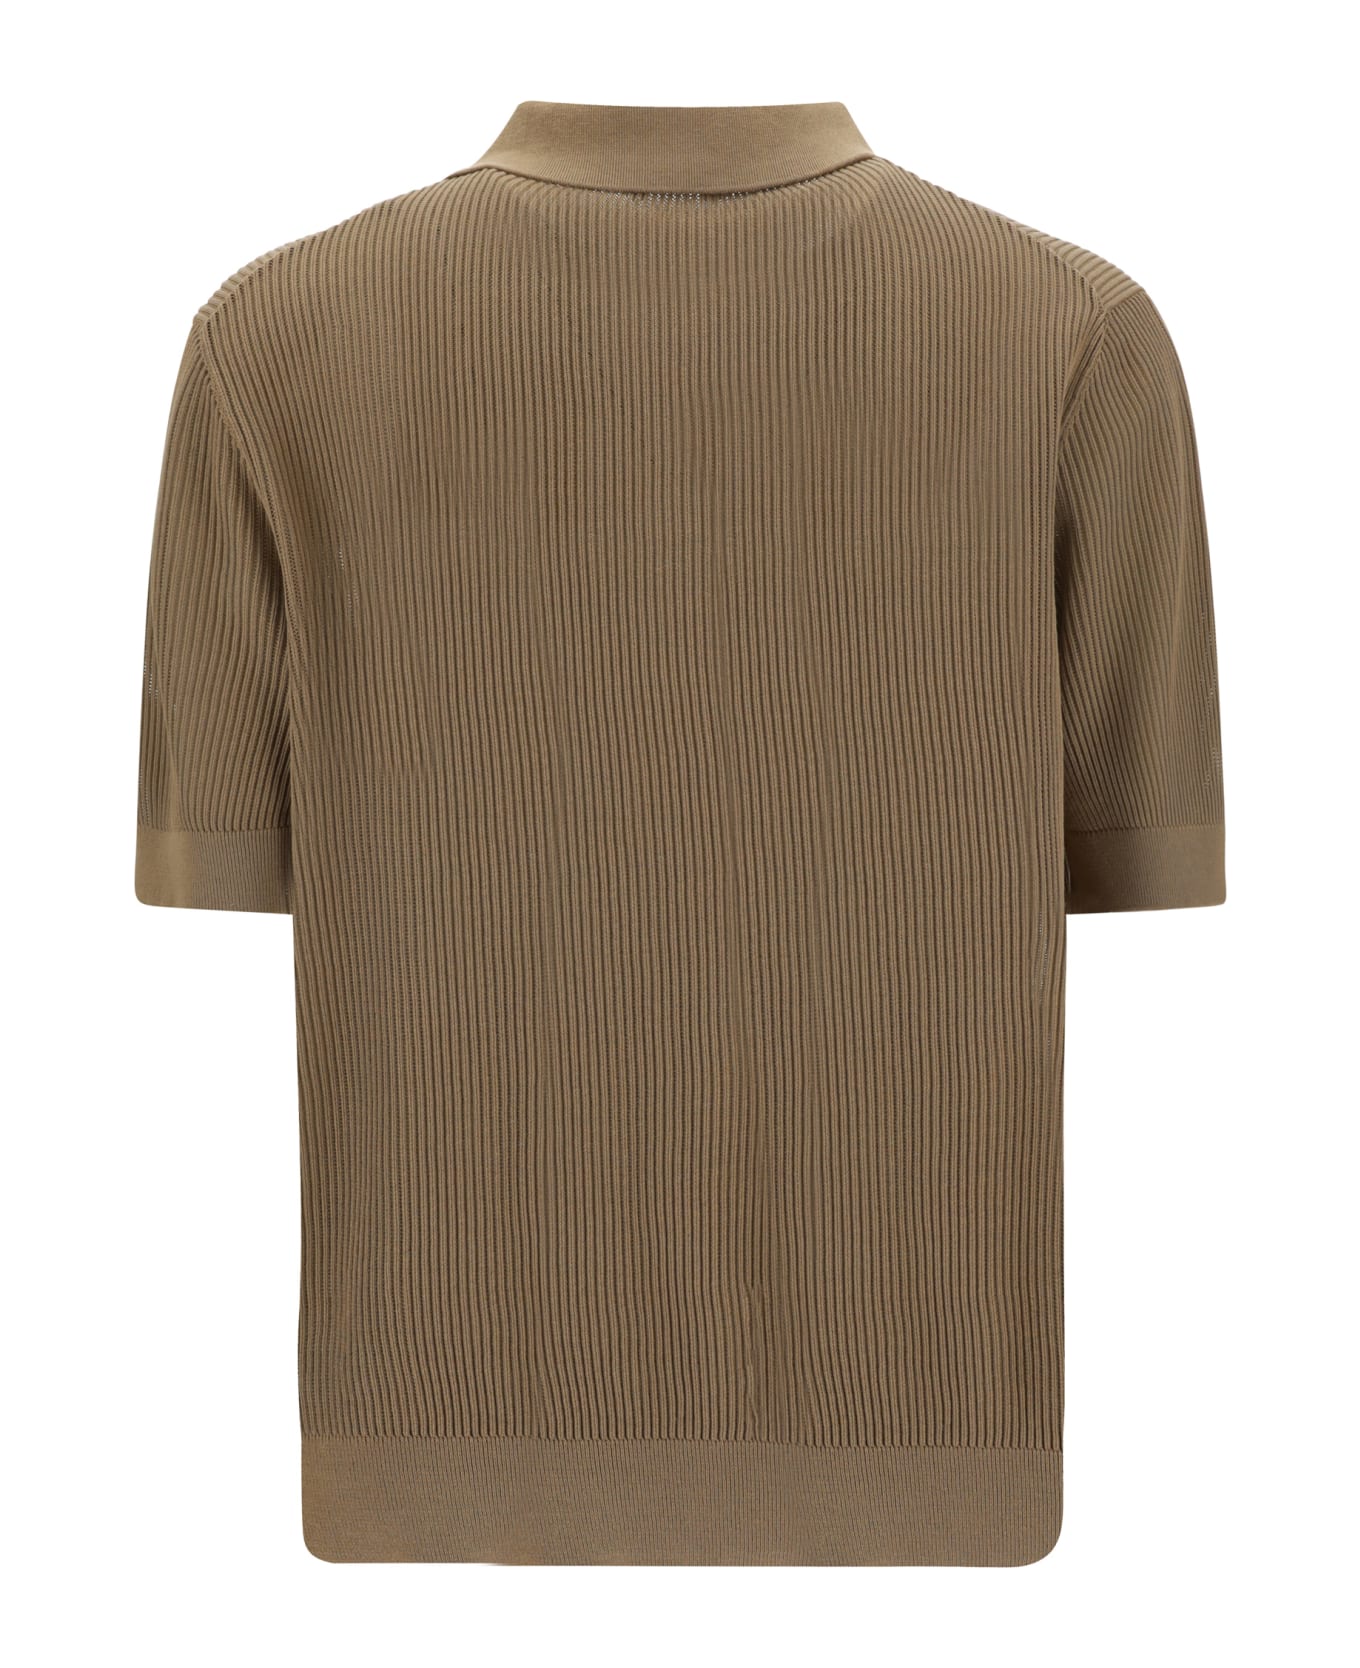 Dolce & Gabbana Perforated Cotton Polo Shirt - Beige ポロシャツ